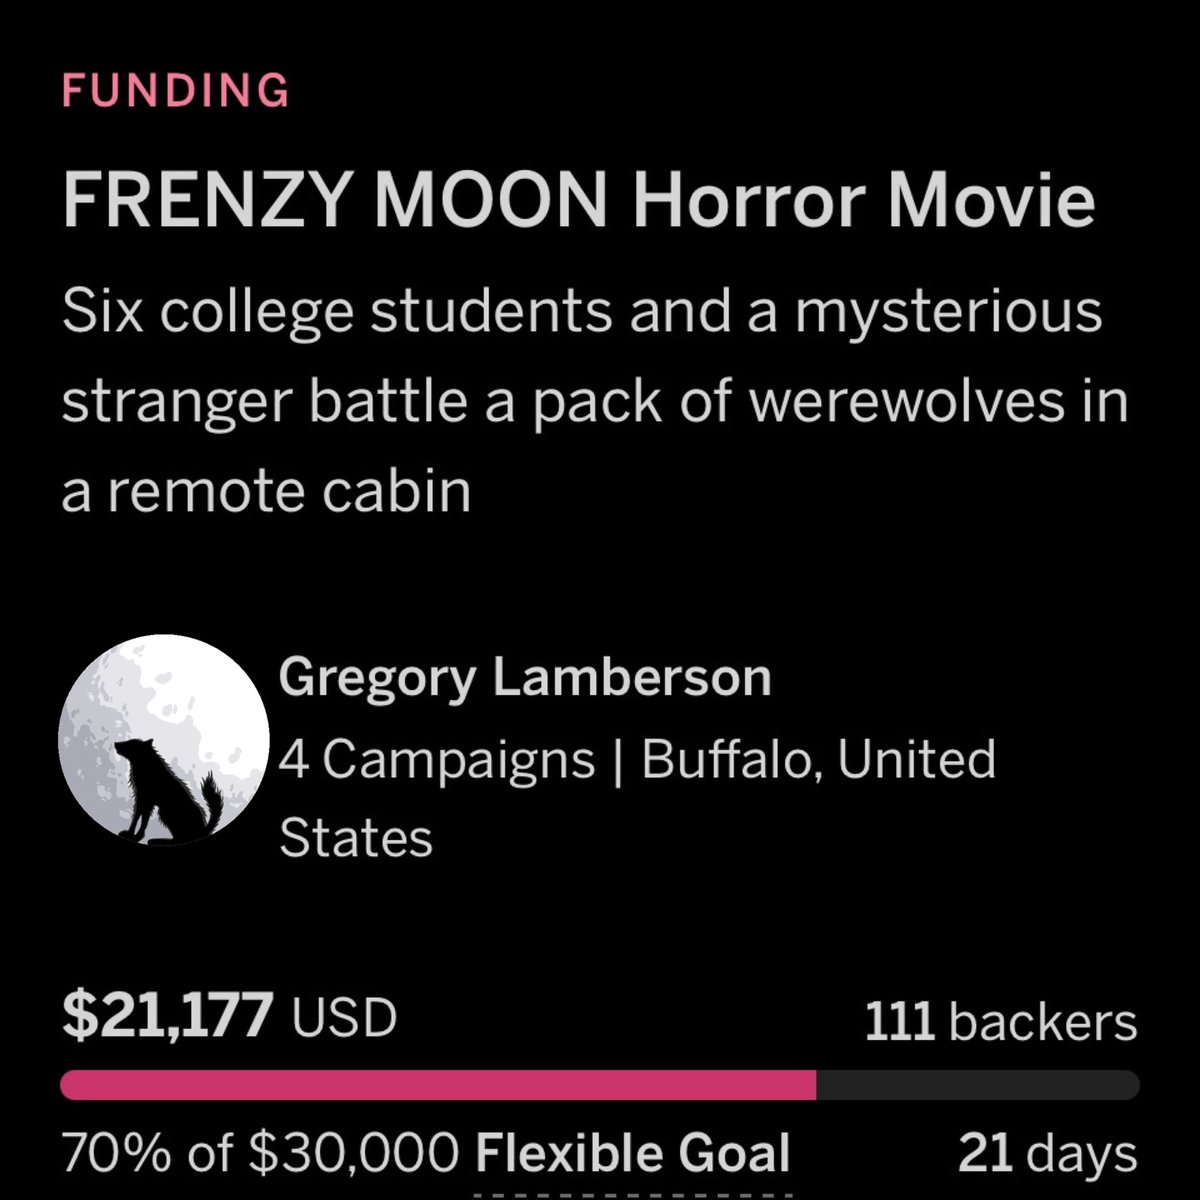 FRENZY MOON is now 70% funded thanks to 111 backers. Our next goal is 22K! Join the pack!

indiegogo.com/projects/frenz…

#frenzymoon #werewolf #film #werewolves #horror #movie #indiegogo #campaign #crowdfunding #goals #supportindiefilm #contribute #perks #joinus